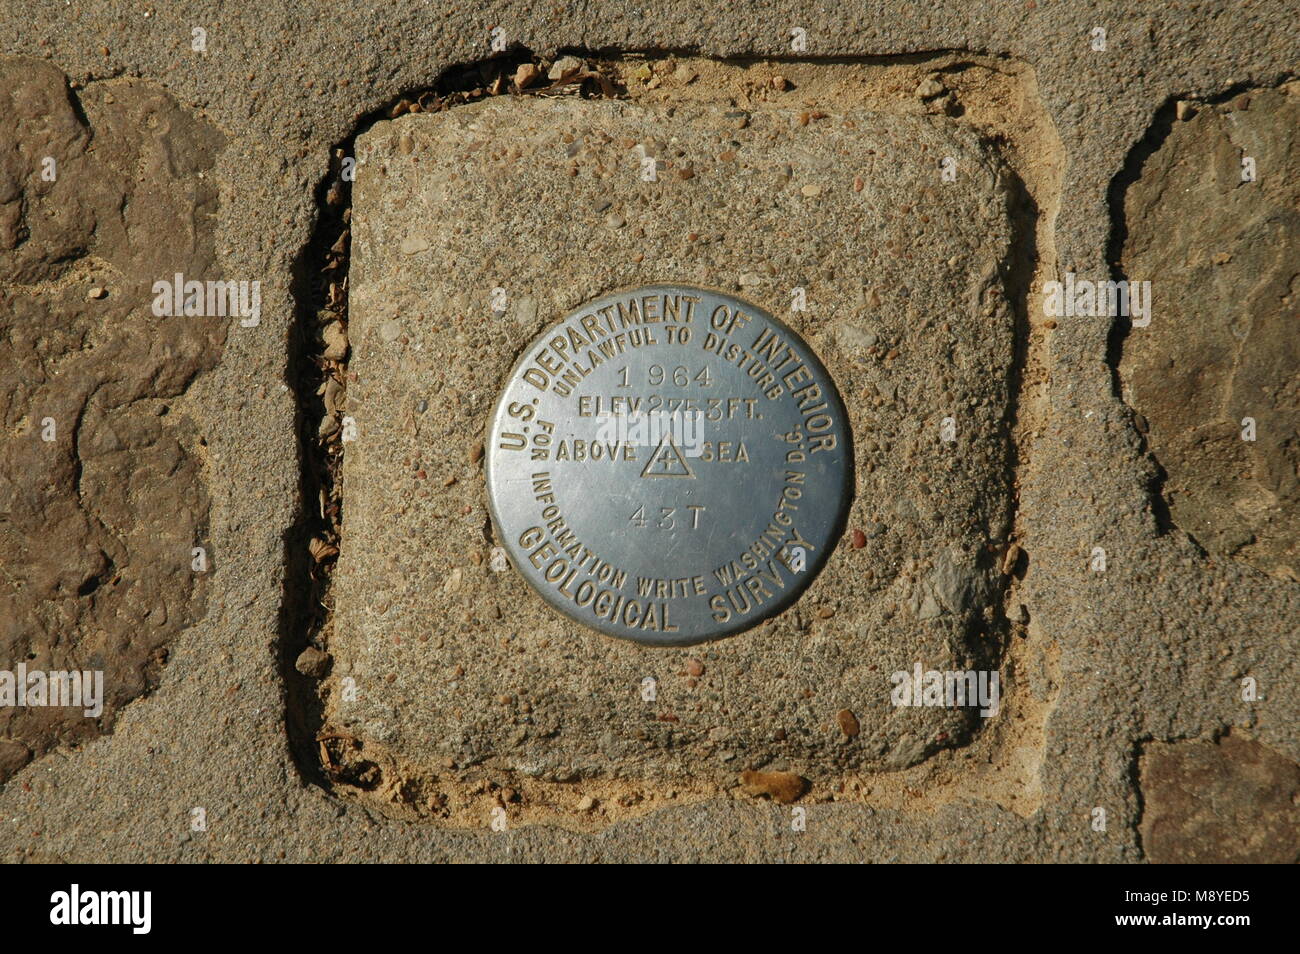 A survey pin marks the top of signal hill, the tallest summer in the Magazine Mountain plateau. Mount Magazine is the highest mountain in Arkansas. Stock Photo